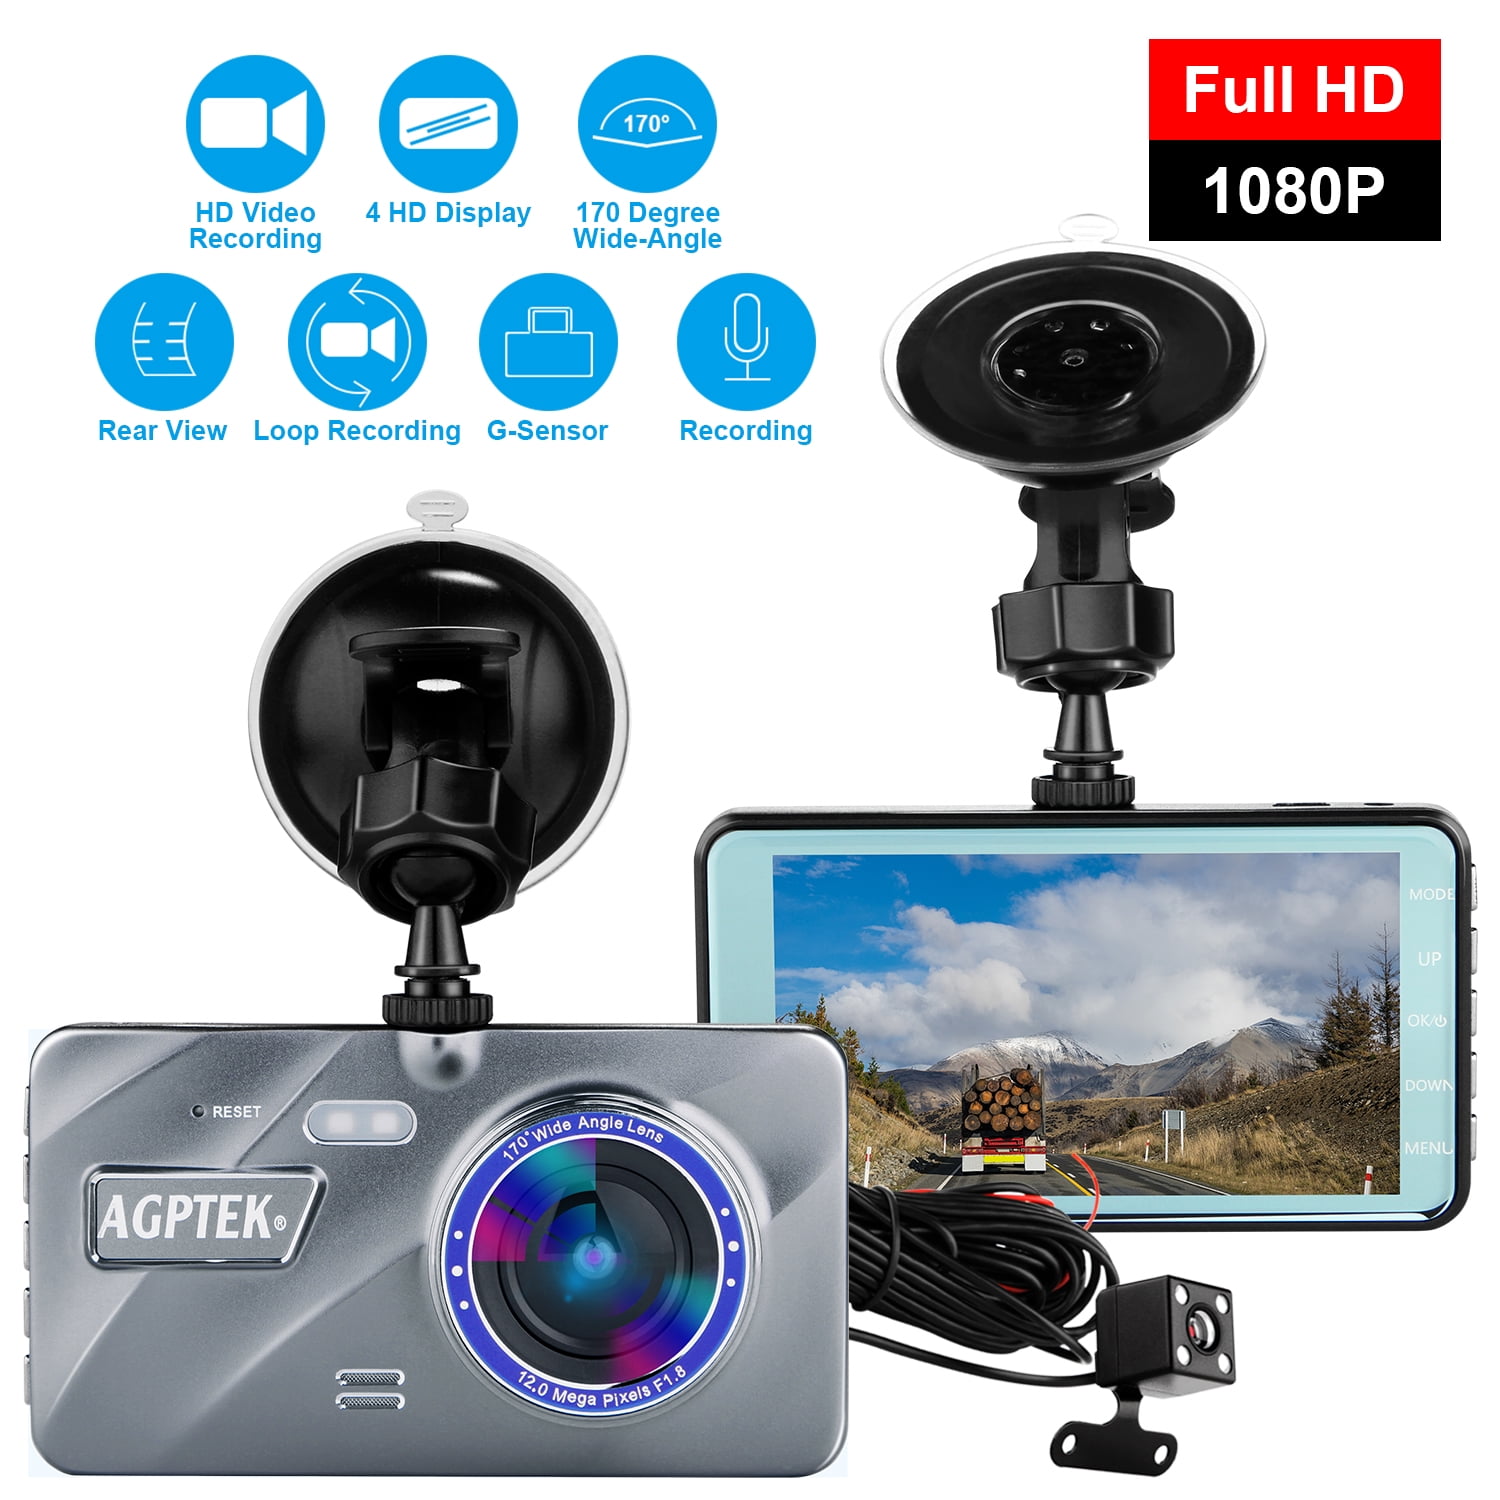 Dash Cam Lexxson 10Meter Longer Cable Dual Lens Car Camera 4.3 Full HD Car Vehicle Dashboard Camera Video Recorder For Vehicles Front and Rear DVR L2010x10m